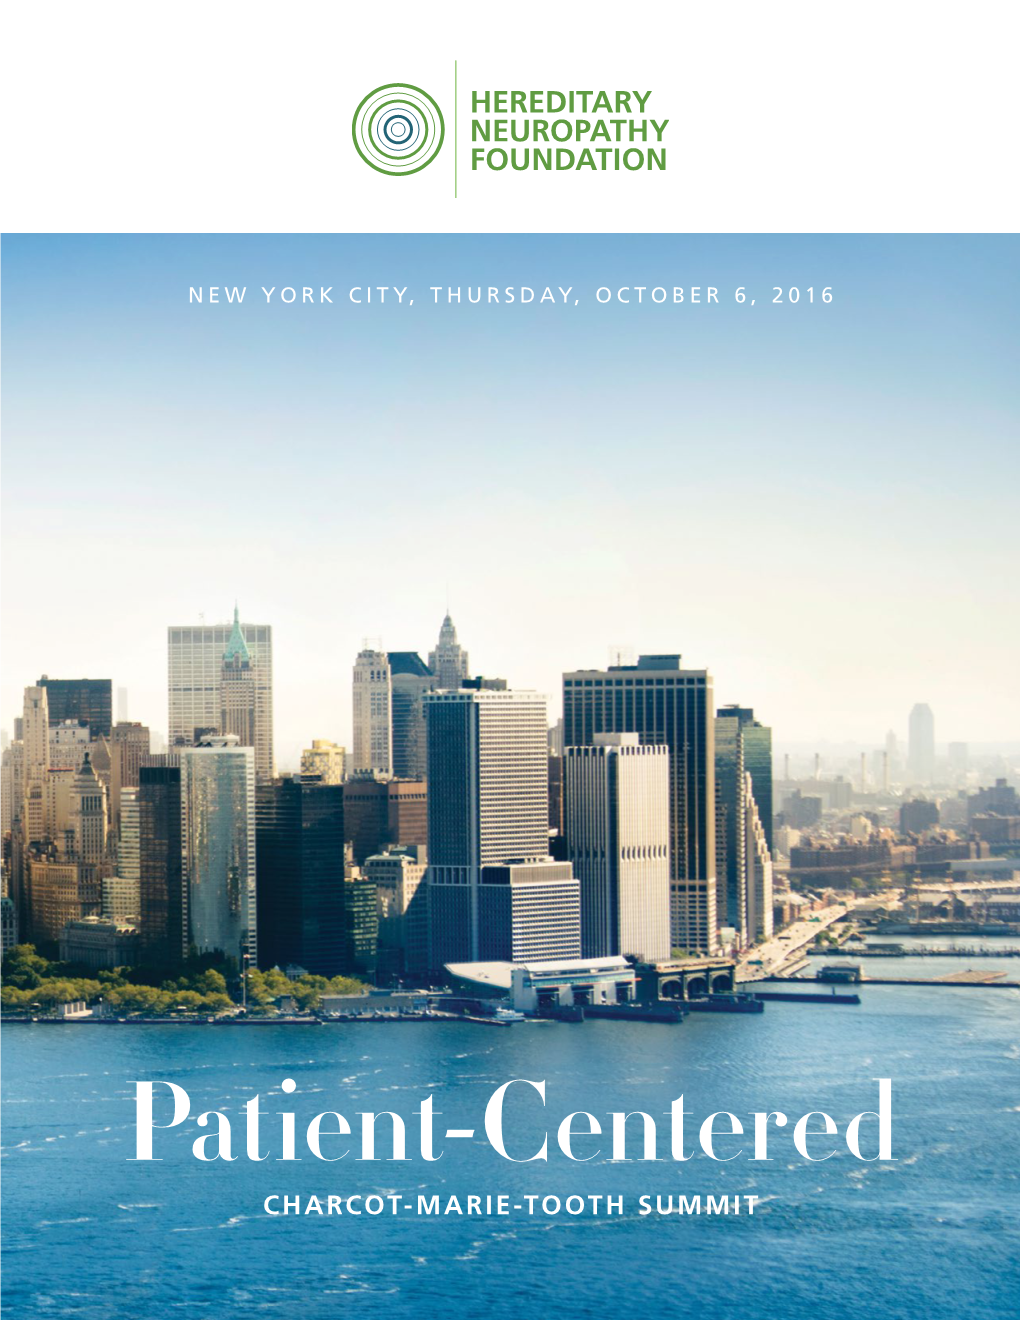 Patient-Centered CHARCOT-MARIE-TOOTH SUMMIT 1 Welcome Letter 2 Schedule 4 Event Speakers and Panelists 32 Abstracts/Research Studies